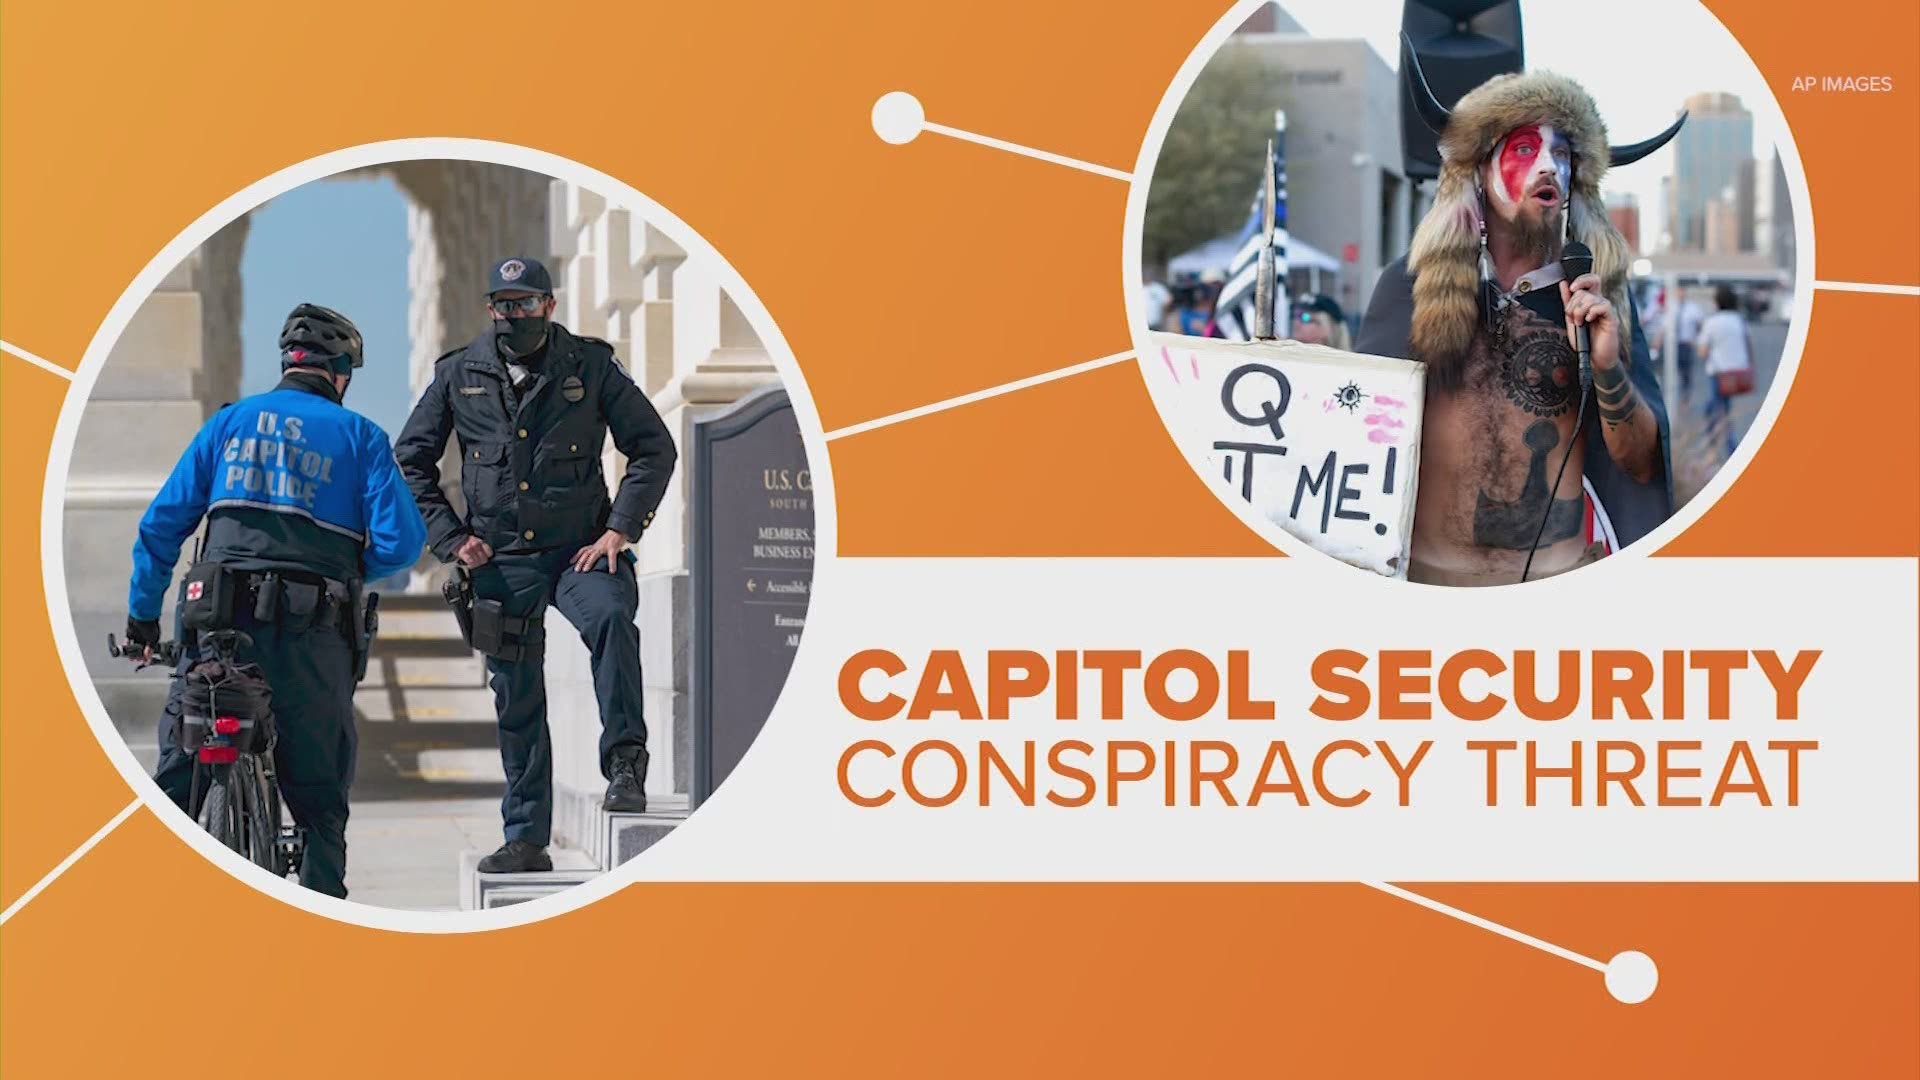 Capitol police are increasing security measures in and around the Capitol because of intelligence that shows there is a plot to try and overtake the building again.